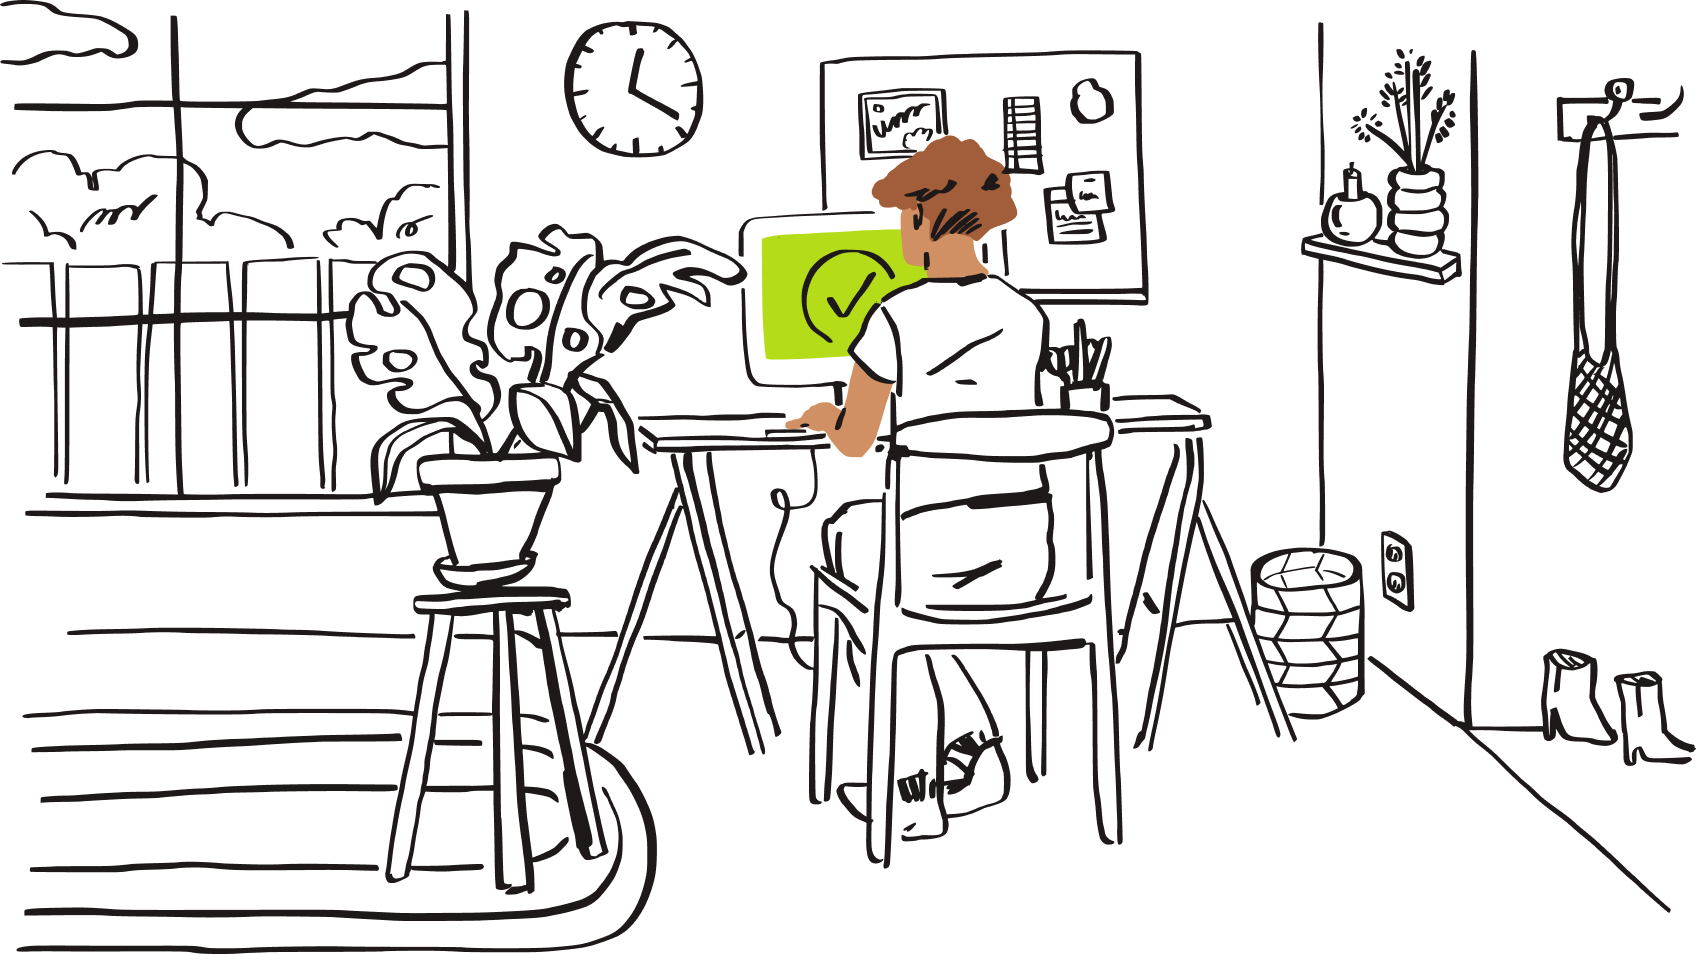 An illustration of a person sitting at a computer with a green tick on the screen.